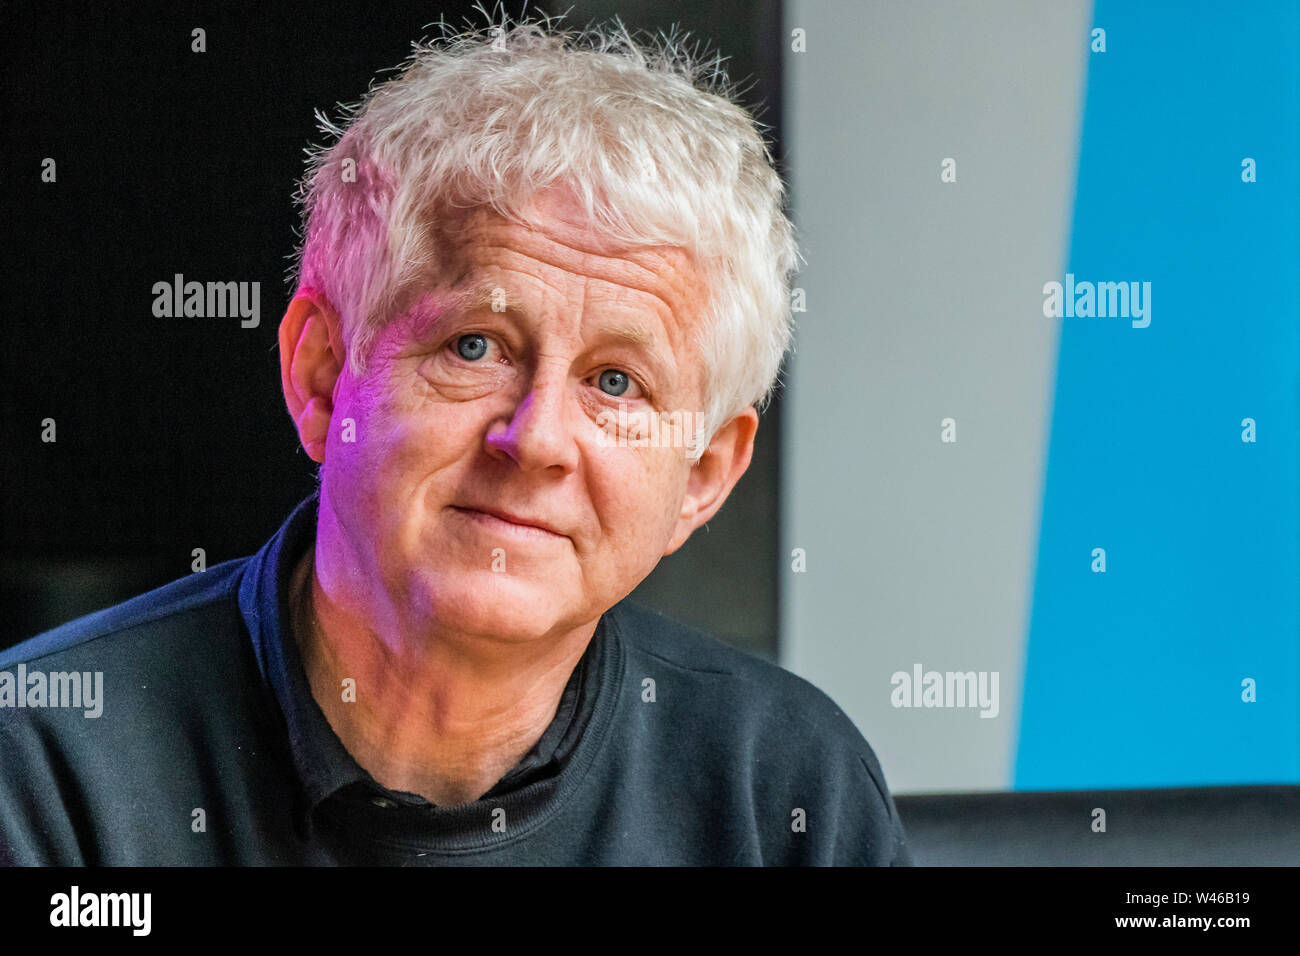 Henham Park, Suffolk, UK. 20 July 2019. writer Richard Curtis talks about his new film Yesterday, which was partly filmed at the festival last year - The Dermot O'Leary show for BBC Radio 2 is broadcast from the BBC Introducing stage in the woods. The 2019 Latitude Festival. Credit: Guy Bell/Alamy Live News Credit: Guy Bell/Alamy Live News Credit: Guy Bell/Alamy Live News Credit: Guy Bell/Alamy Live News Stock Photo